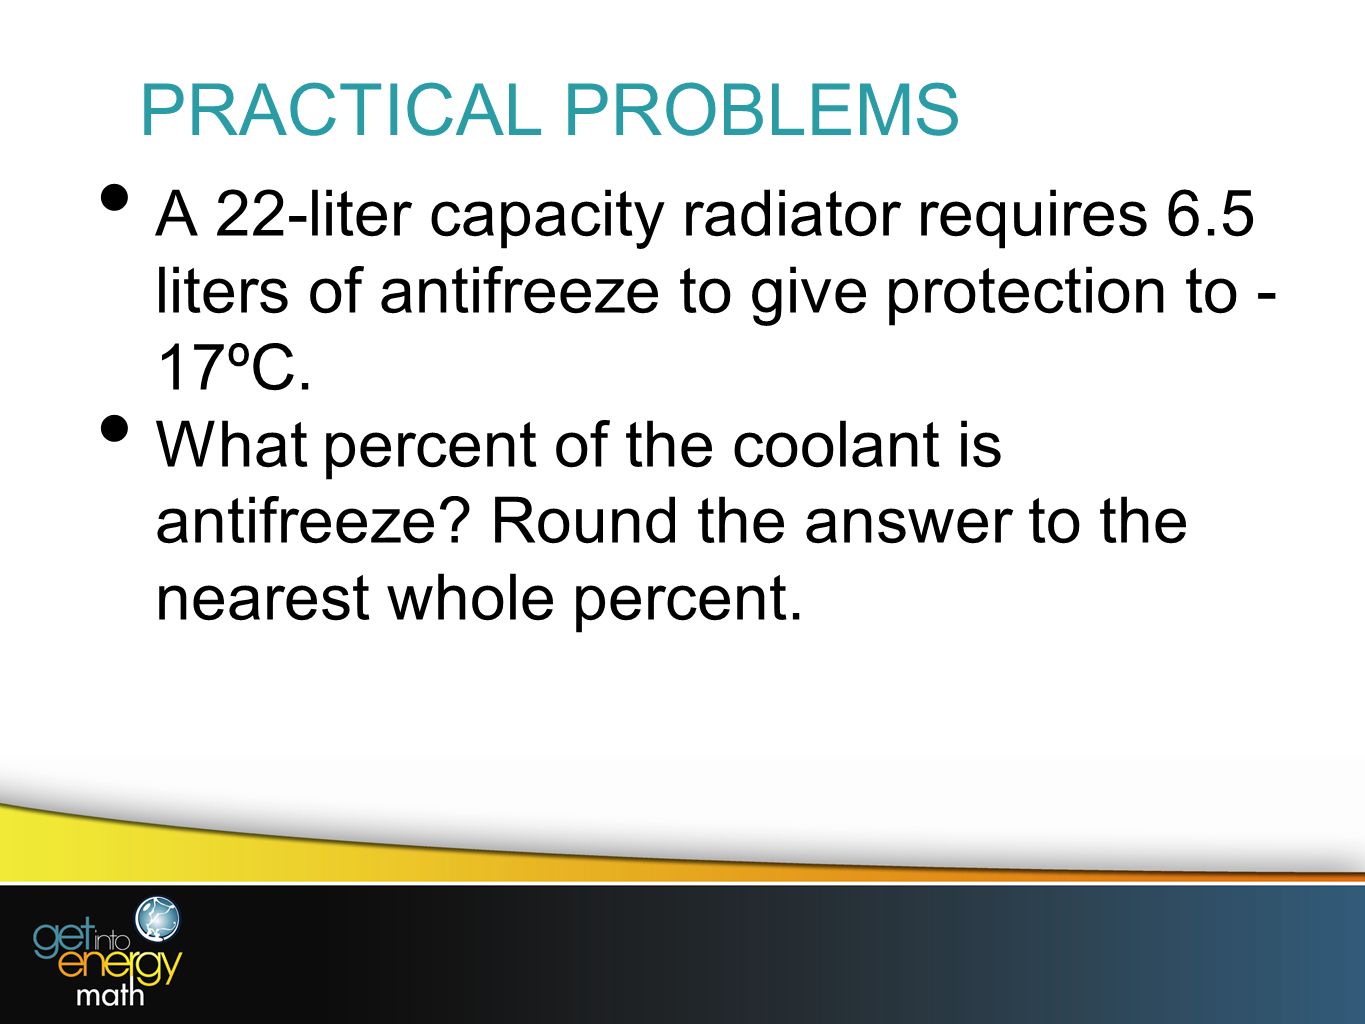 PRACTICAL PROBLEMS A 22-liter capacity radiator requires 6.5 liters of antifreeze to give protection to - 17ºC.